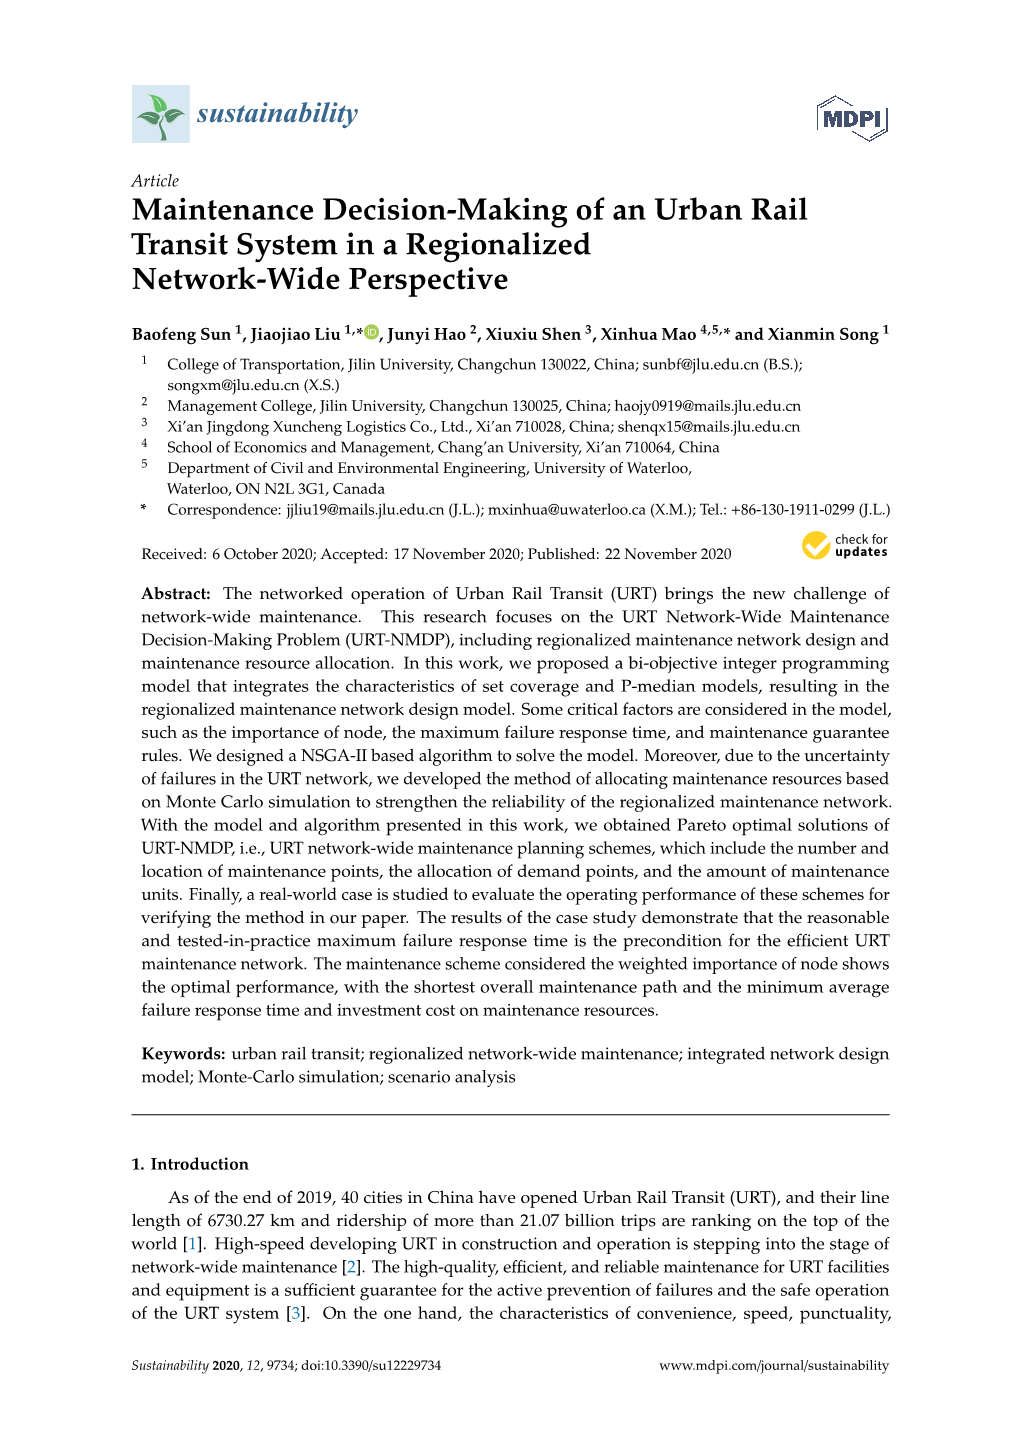 Maintenance Decision-Making of an Urban Rail Transit System in a Regionalized Network-Wide Perspective